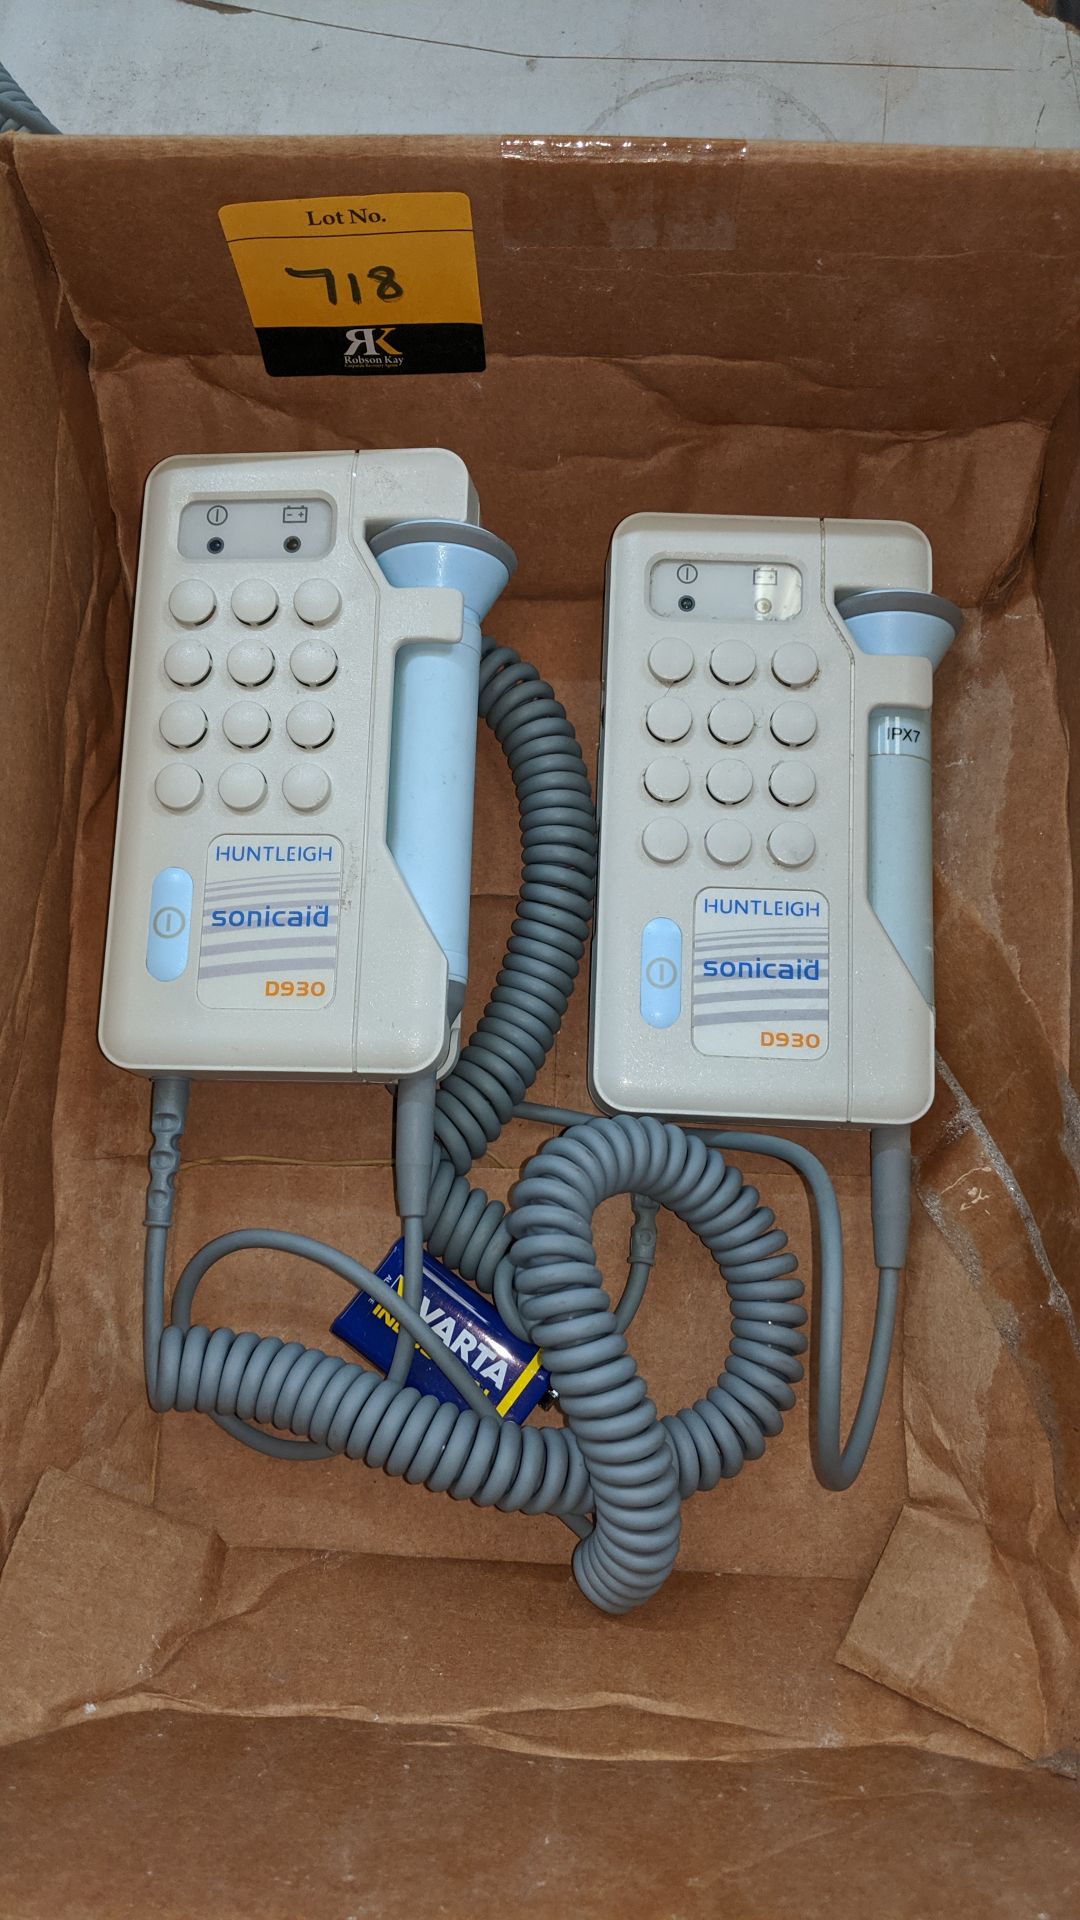 2 off Huntleigh Sonicaid D930 Fetal Doppler testers - in a box marked as being faulty. This is one - Image 2 of 4